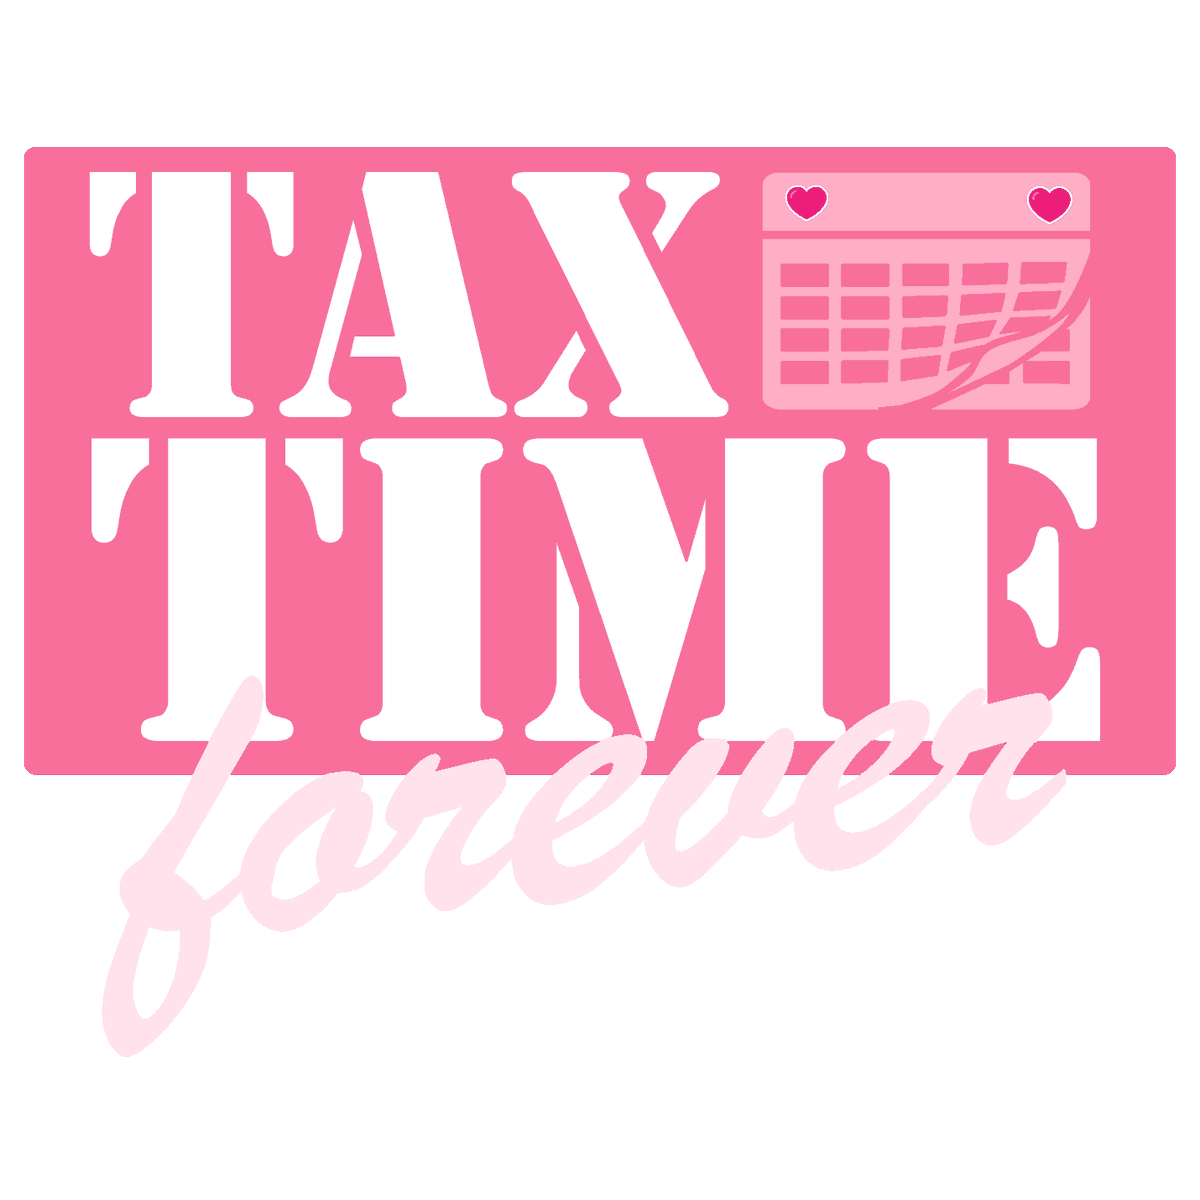 Taxtime is for lovers